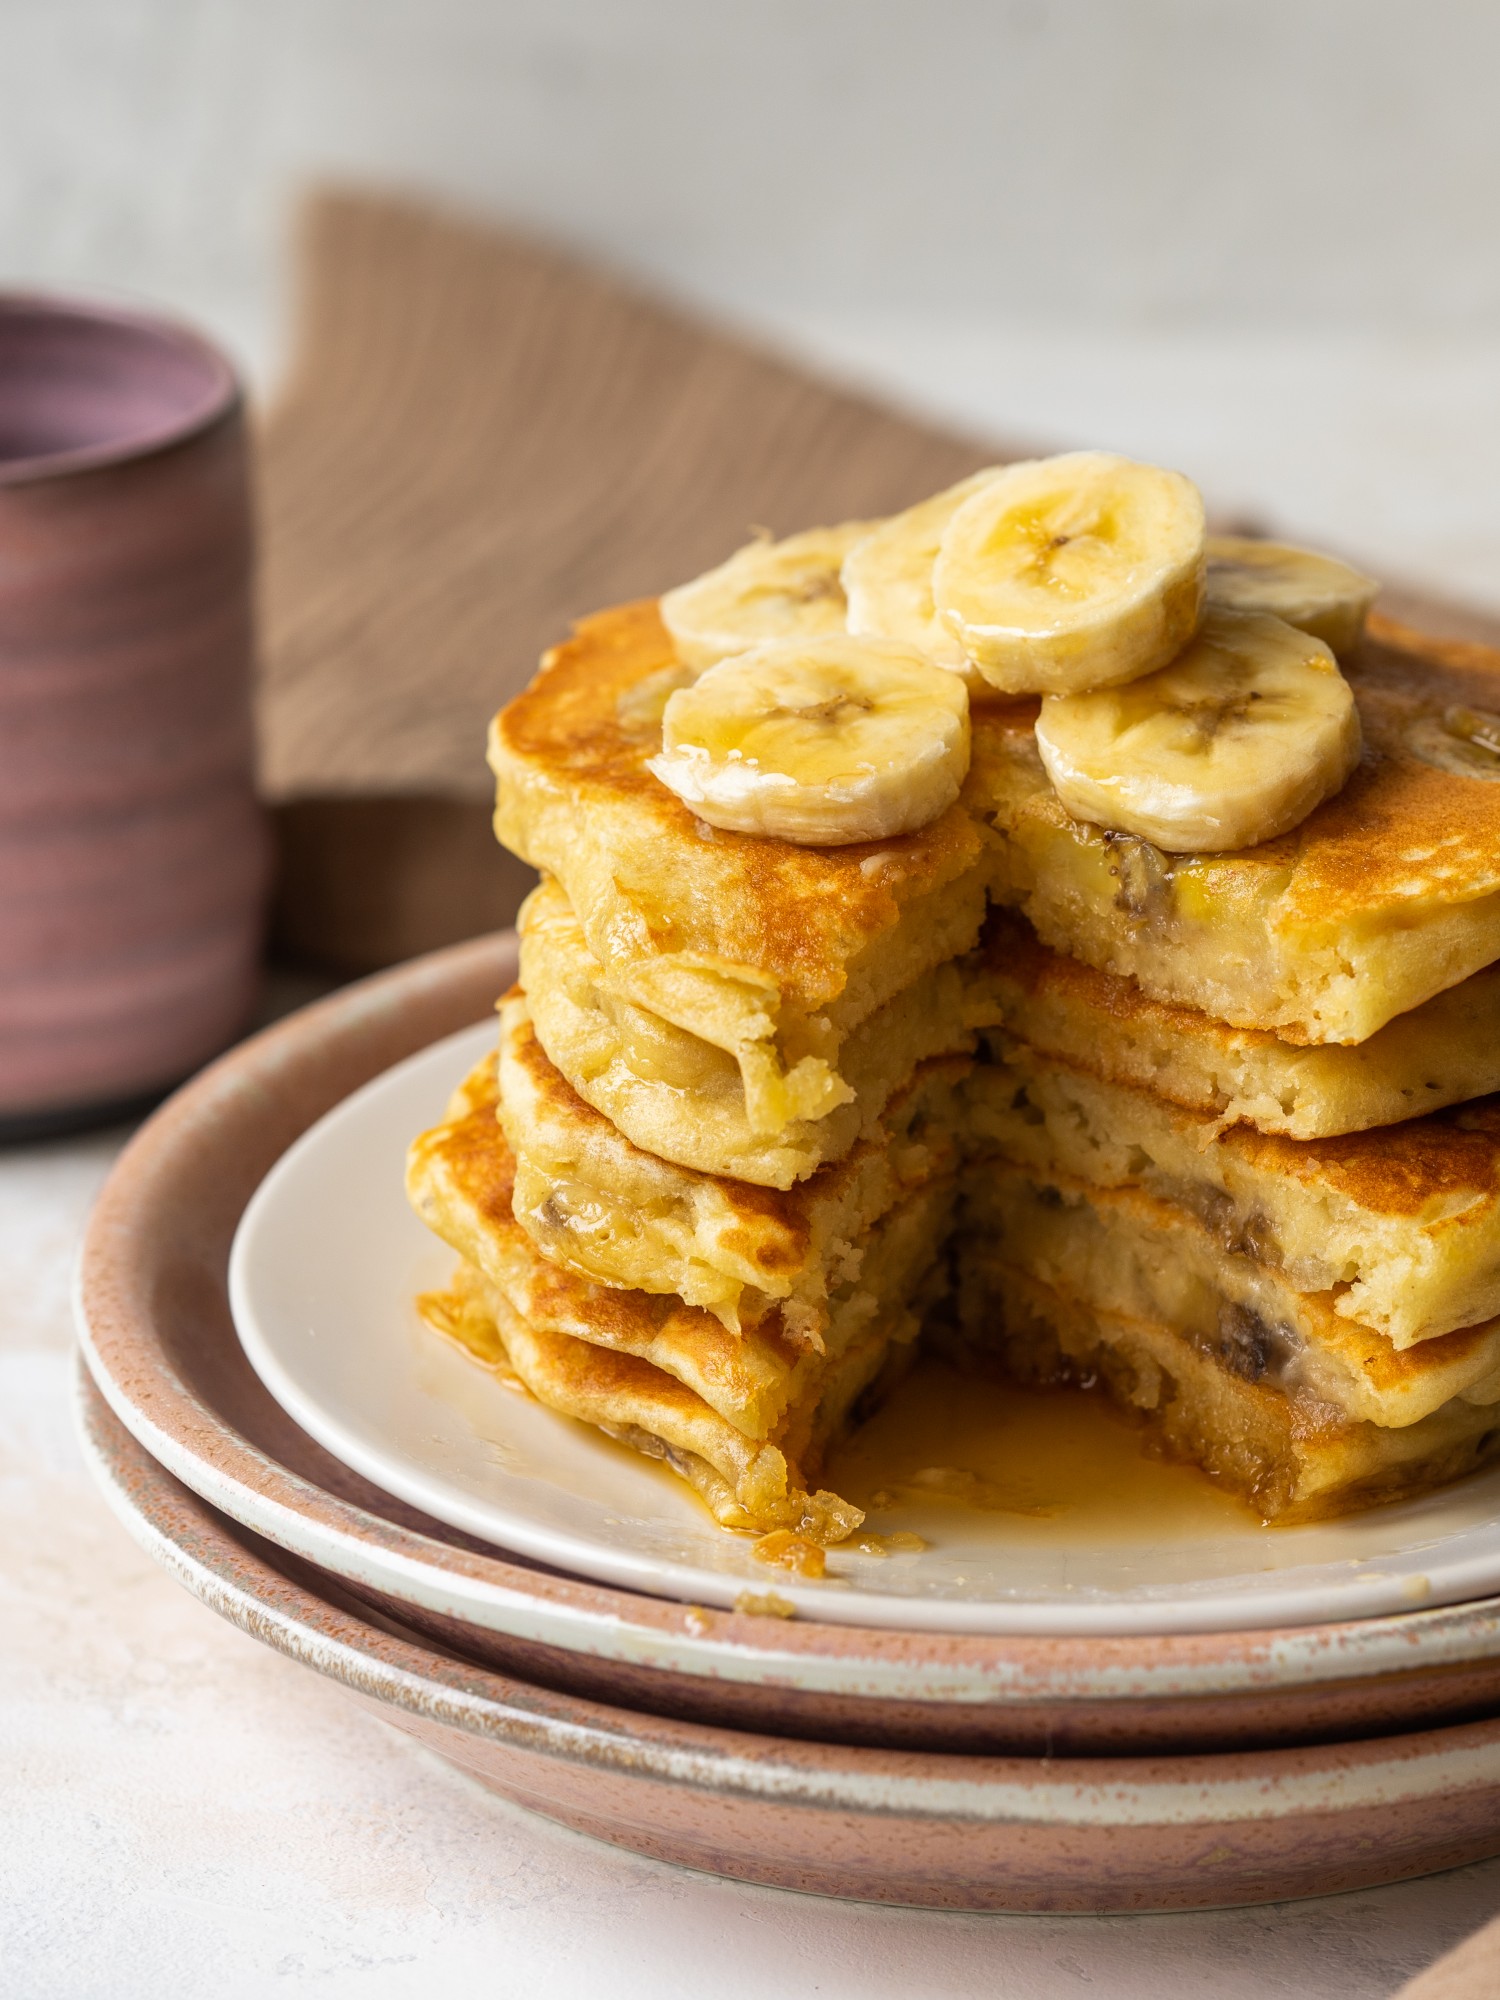 Side view of fluffy banana pancakes stacked up on a plated with a triangle cut out of the pancakes